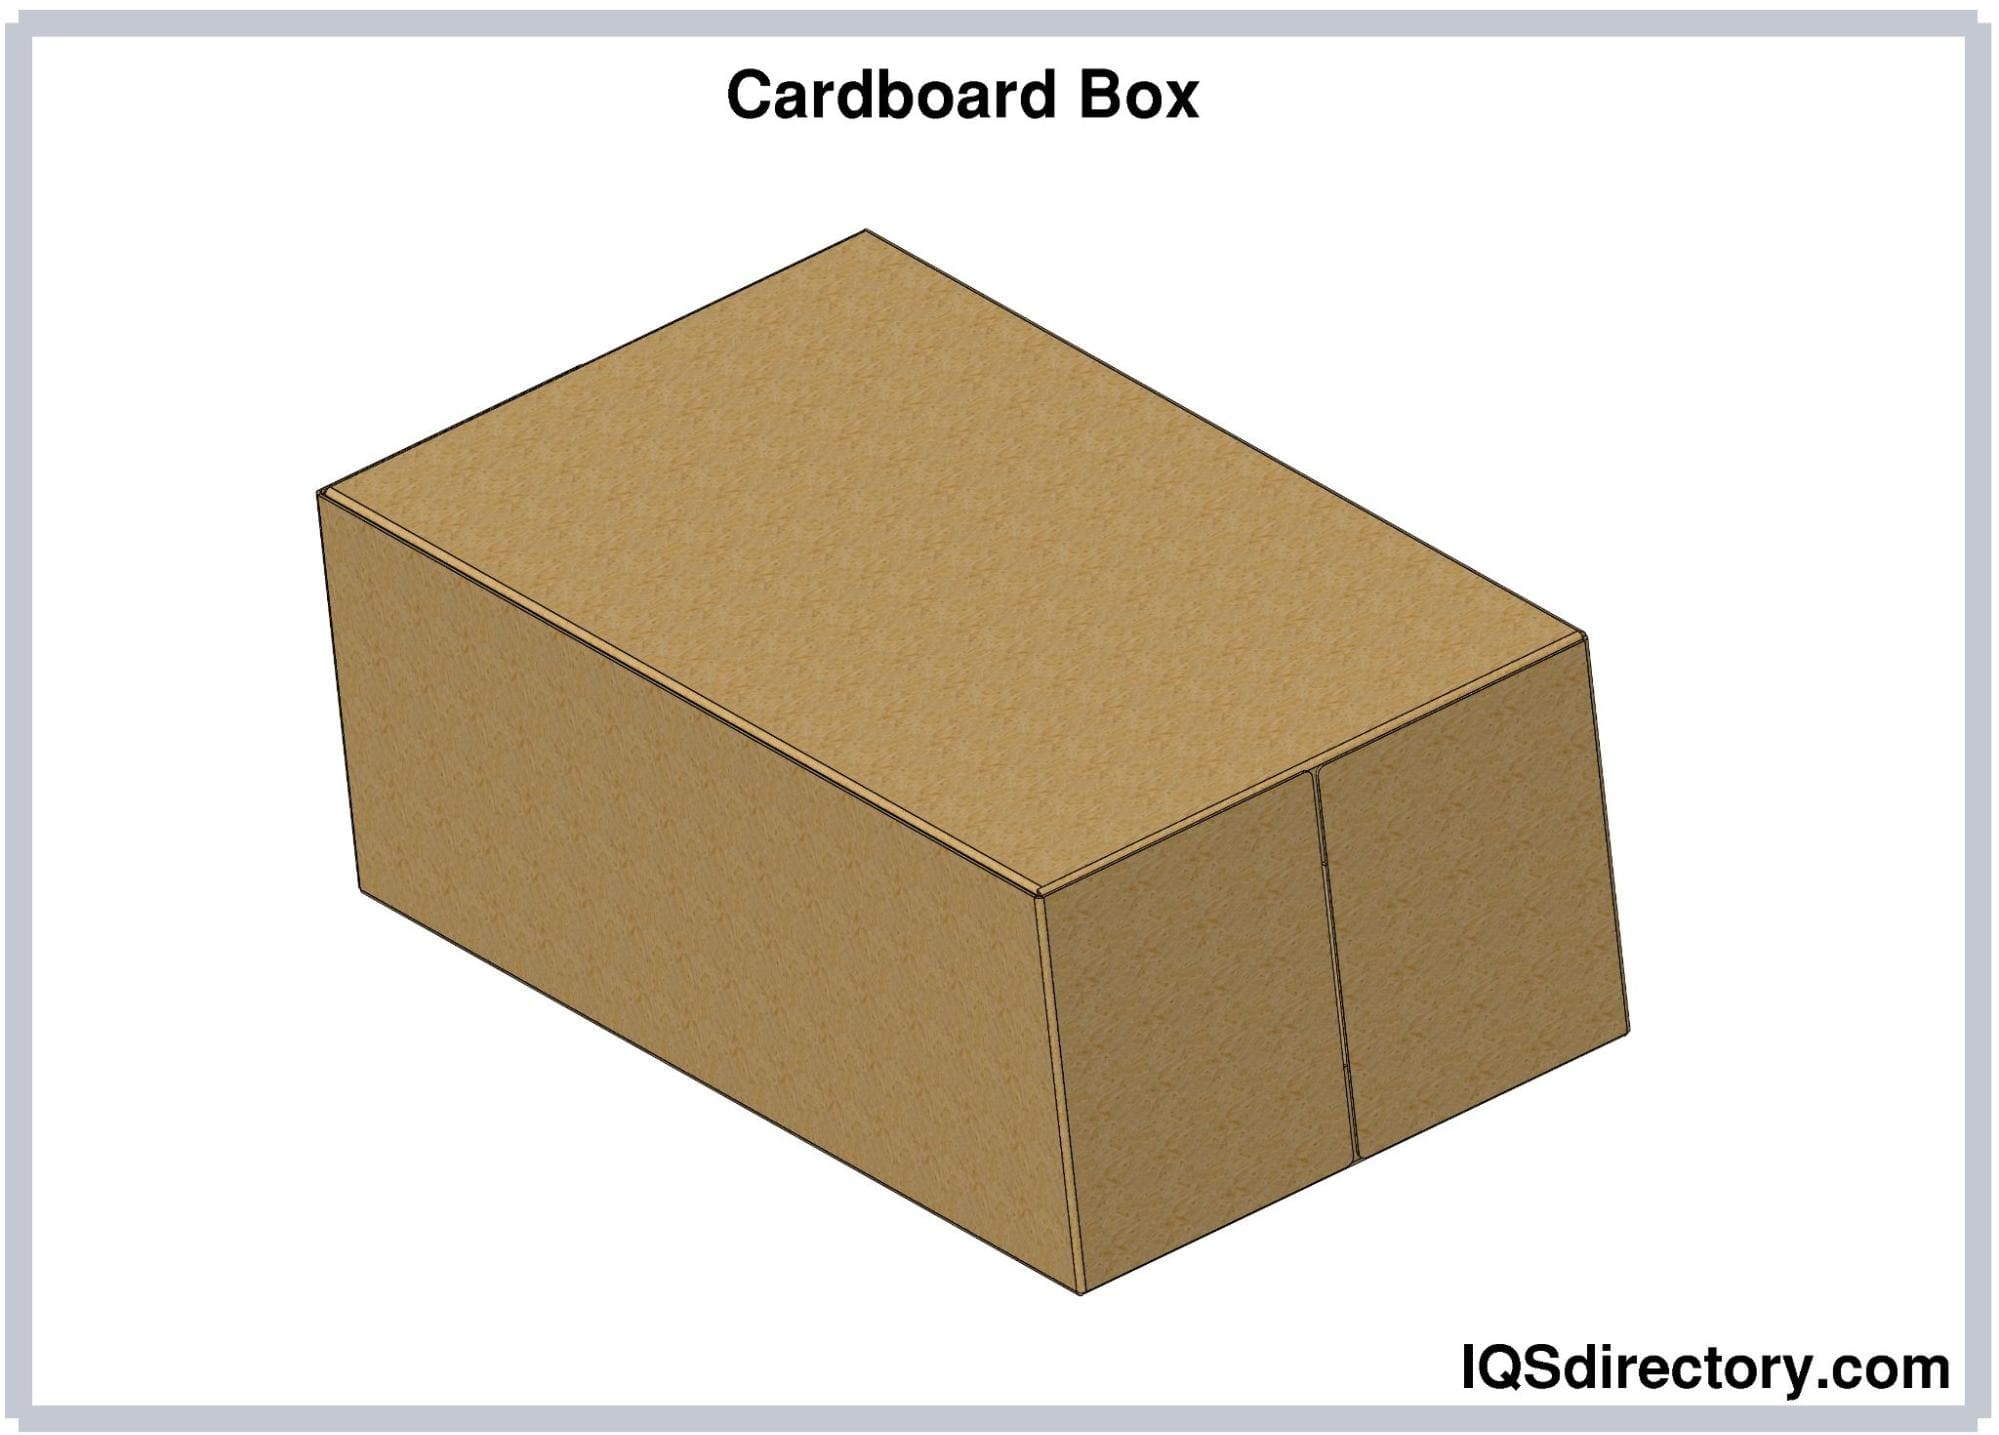 How to Make a Cardboard Box From Recycled Cardboard : 5 Steps